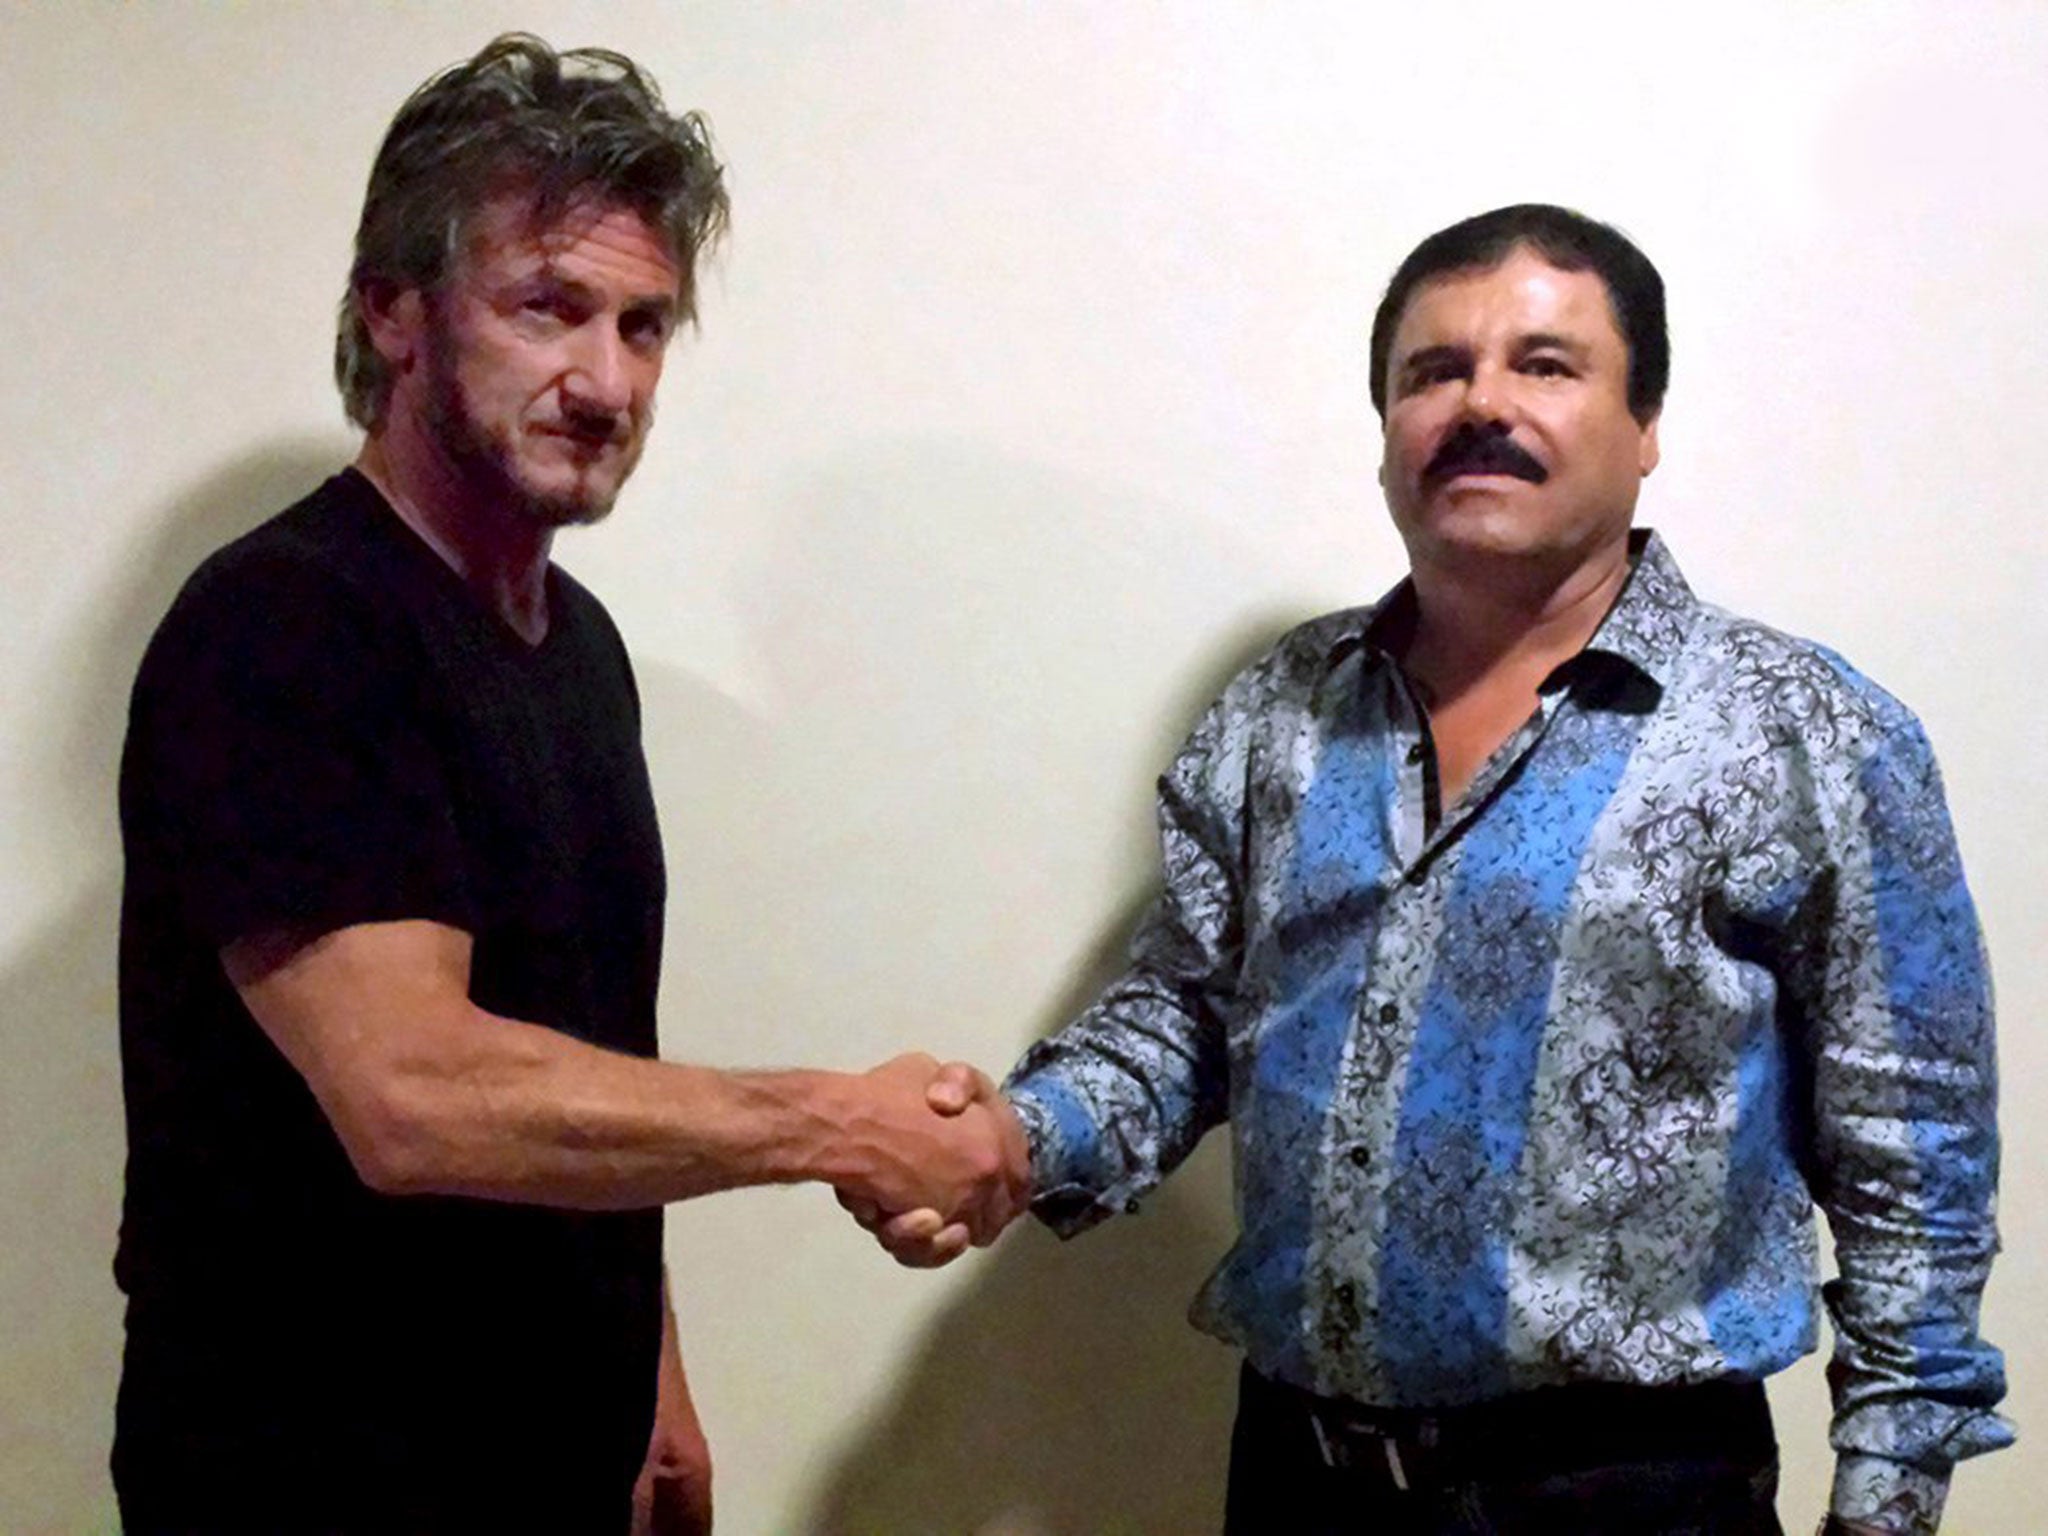 An interview that actor Sean Penn bagged with ‘El Chapo’, the Mexican drug lord arrested last week after months on the run, has angered the White House